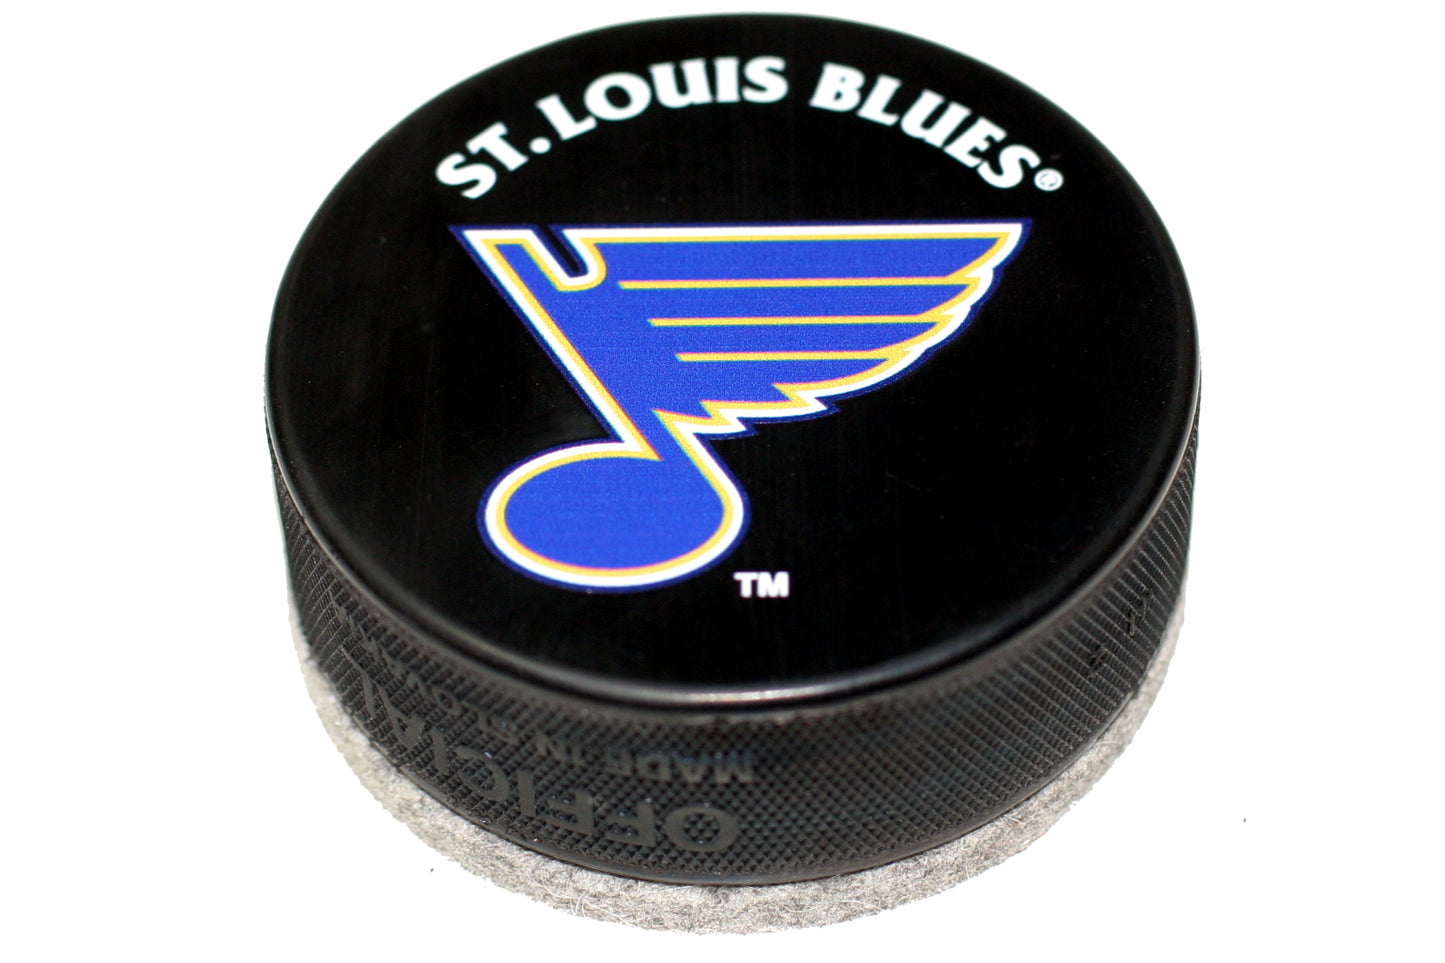 St Louis Blues Basic Series Hockey Puck Board Eraser For Chalk and Whiteboards